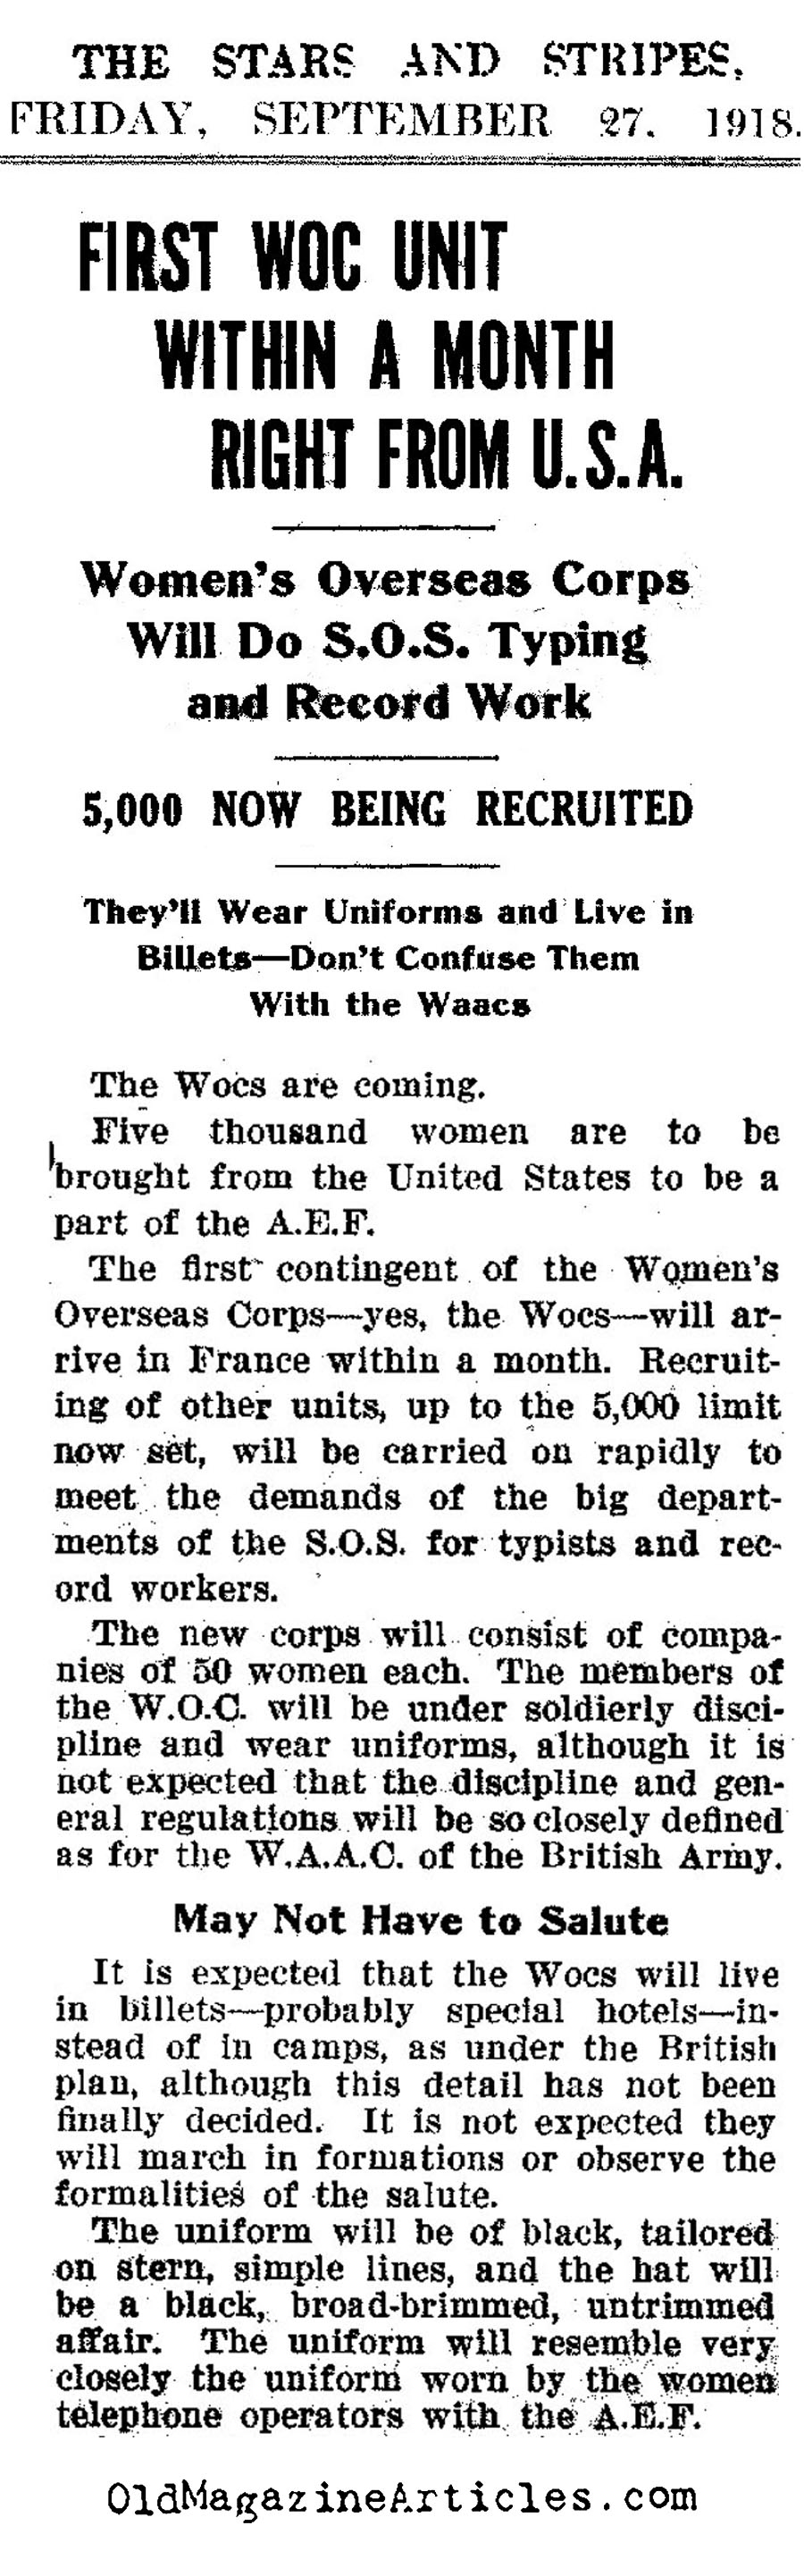 The Women's Overseas Corps (The Stars and Stripes, 1918)